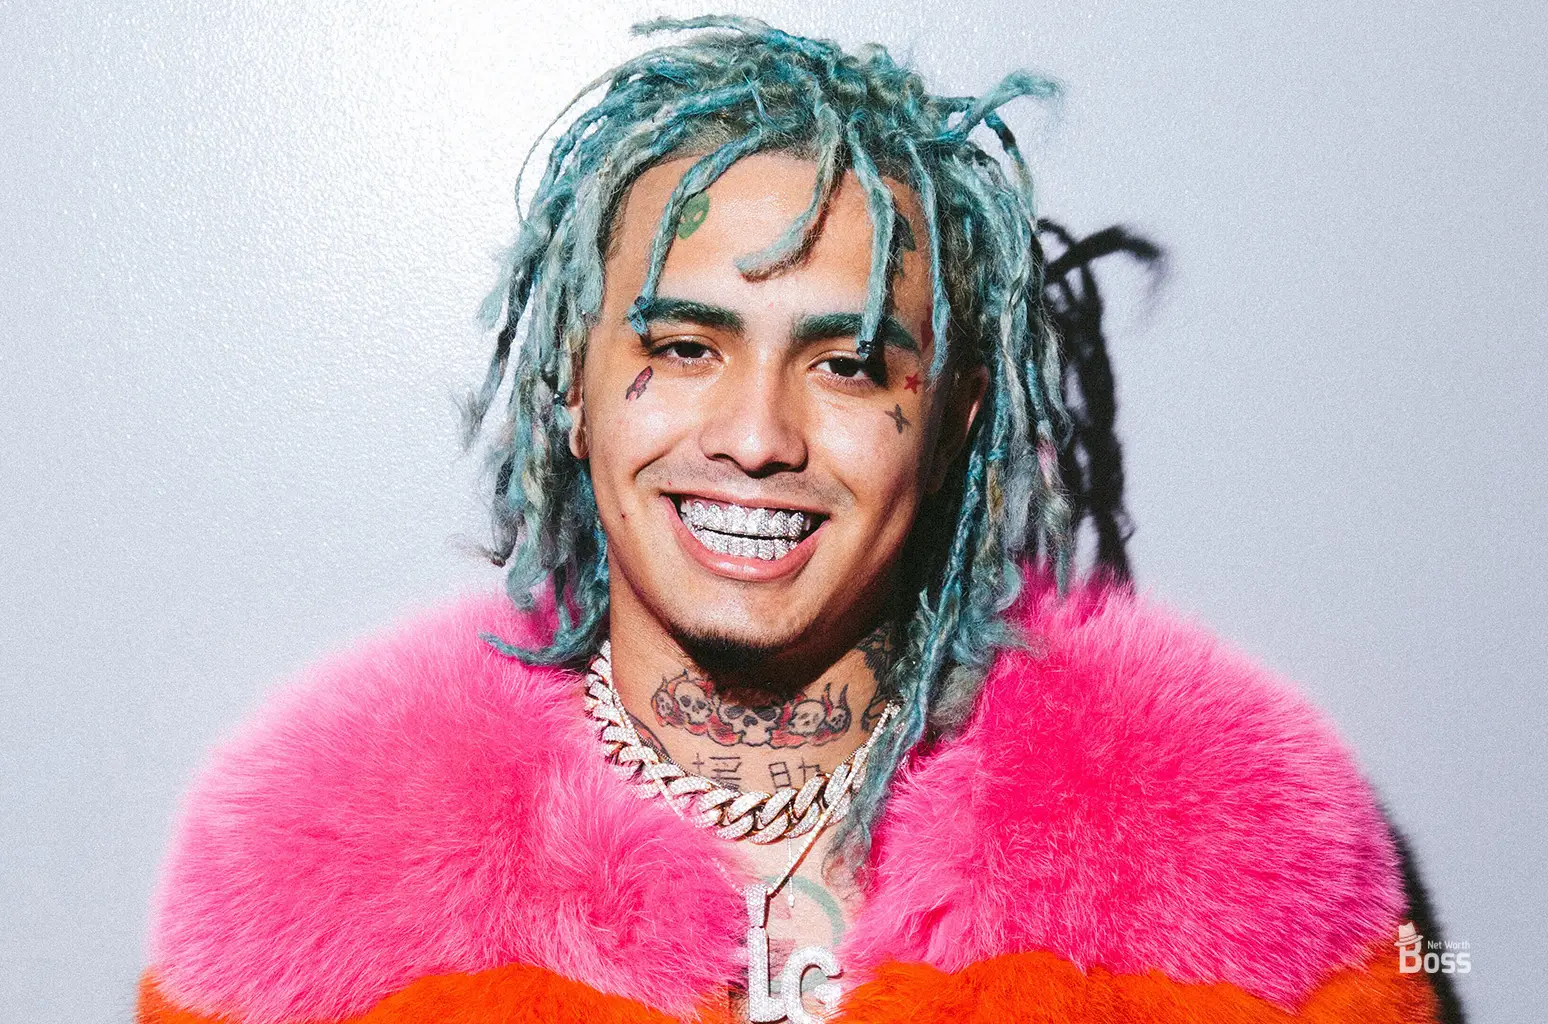 Lil Pump Career And Success Story